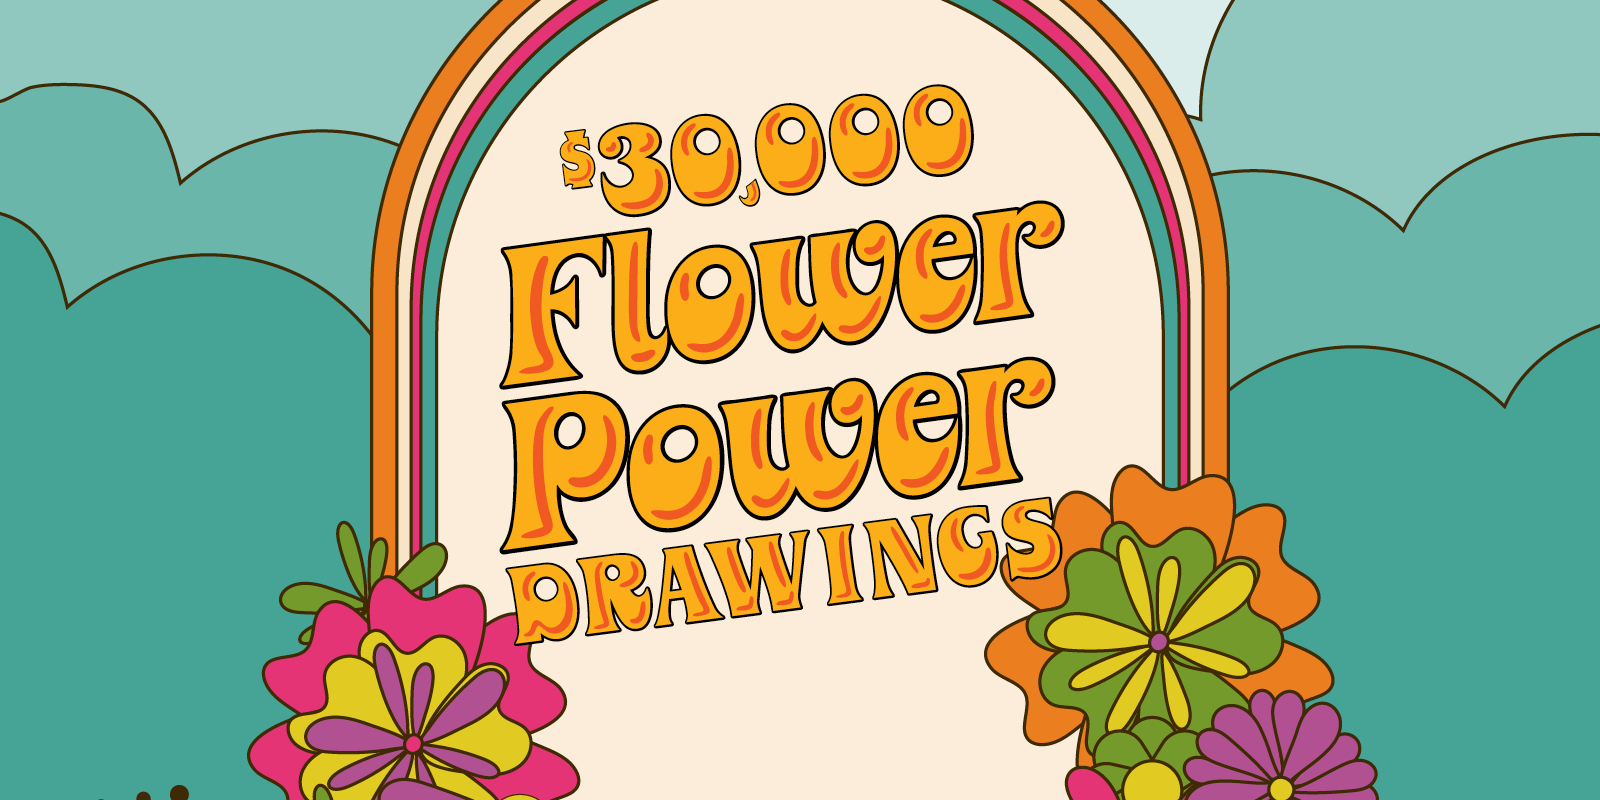 Flower Power slot tournament creative that has a 70's vibe and color theme